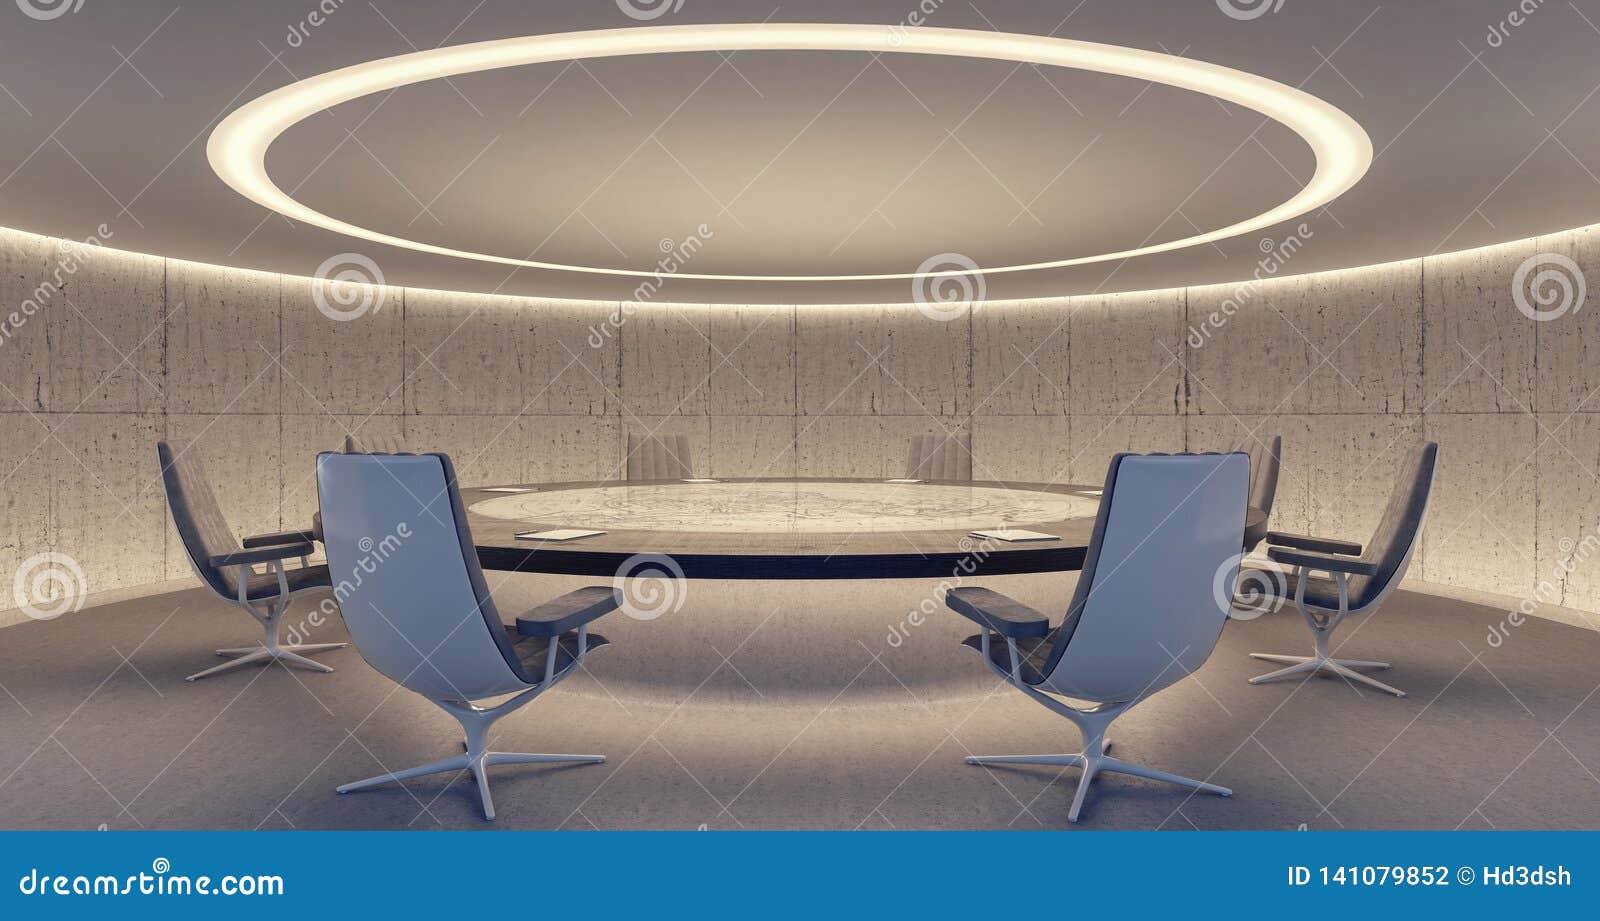 oval conference room with round table and chairs